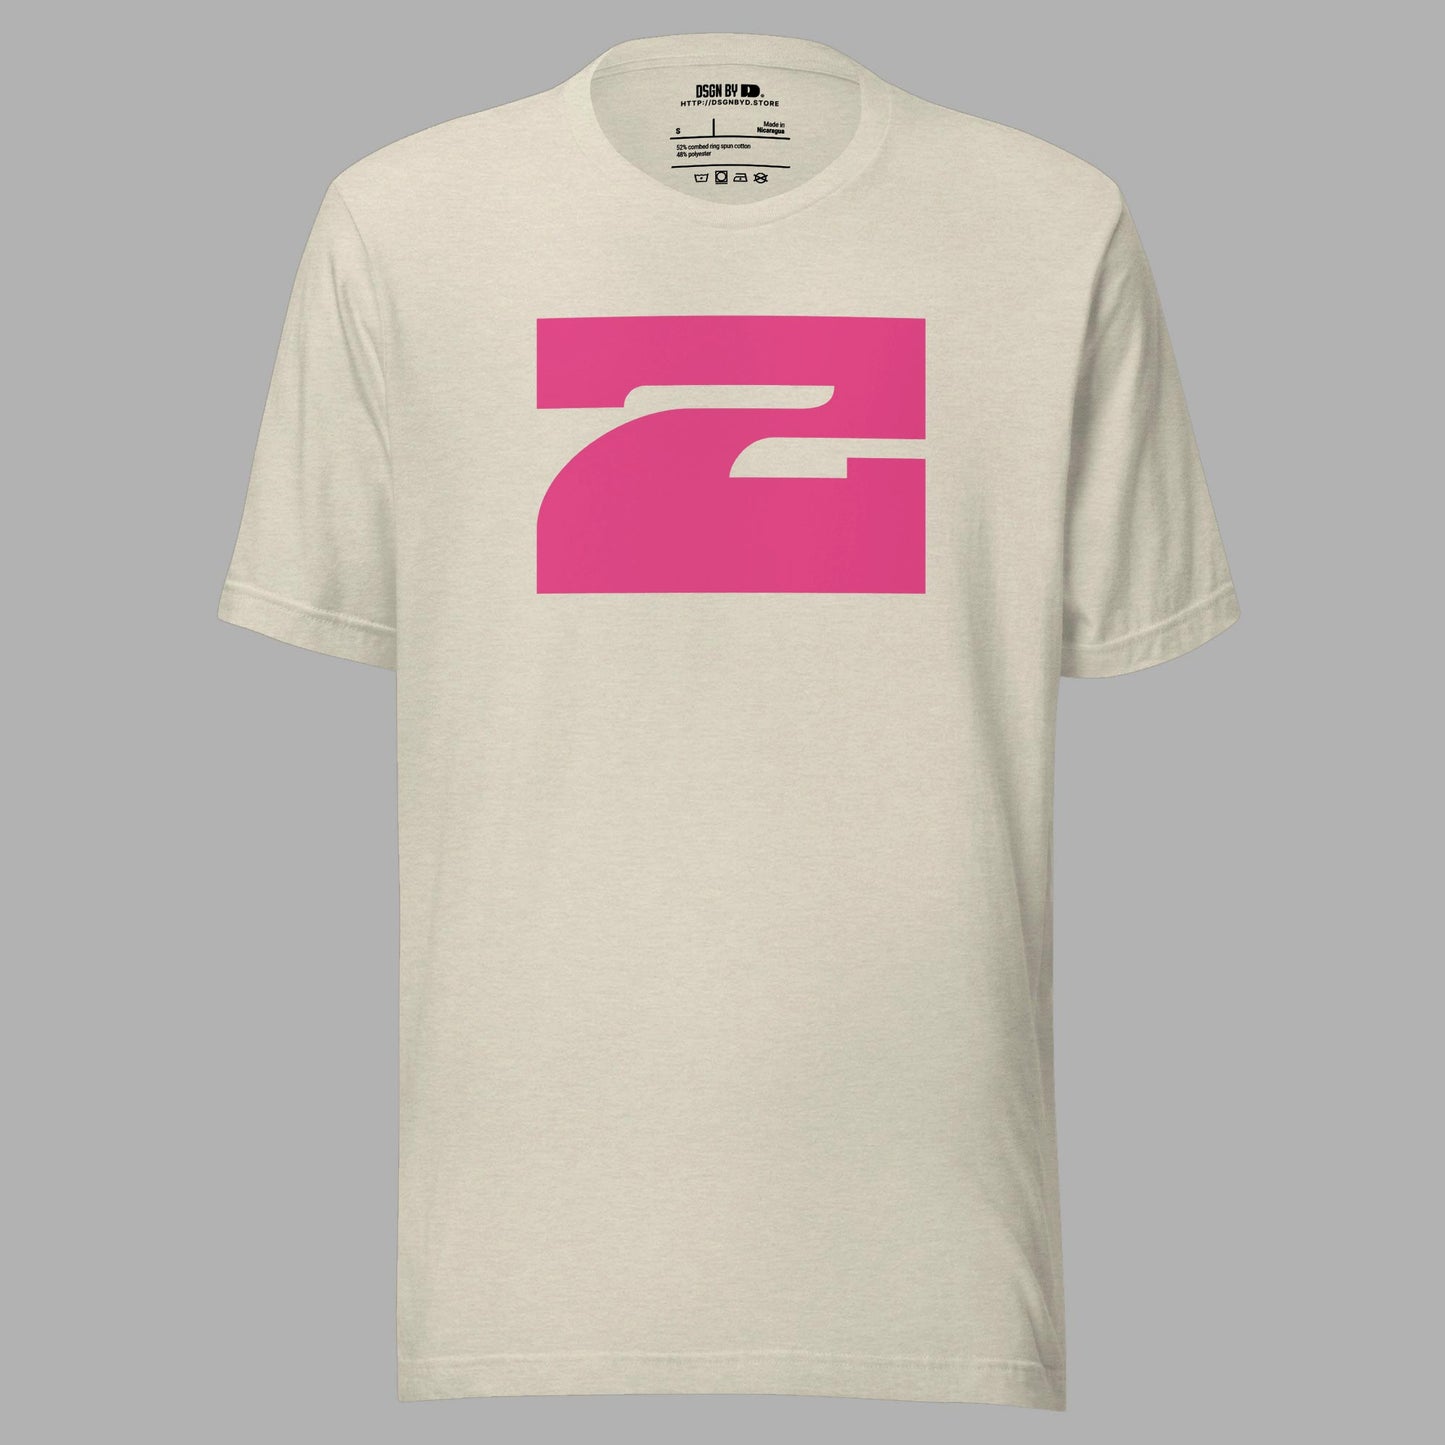 A beige cotton unisex graphic tee with letter Z.